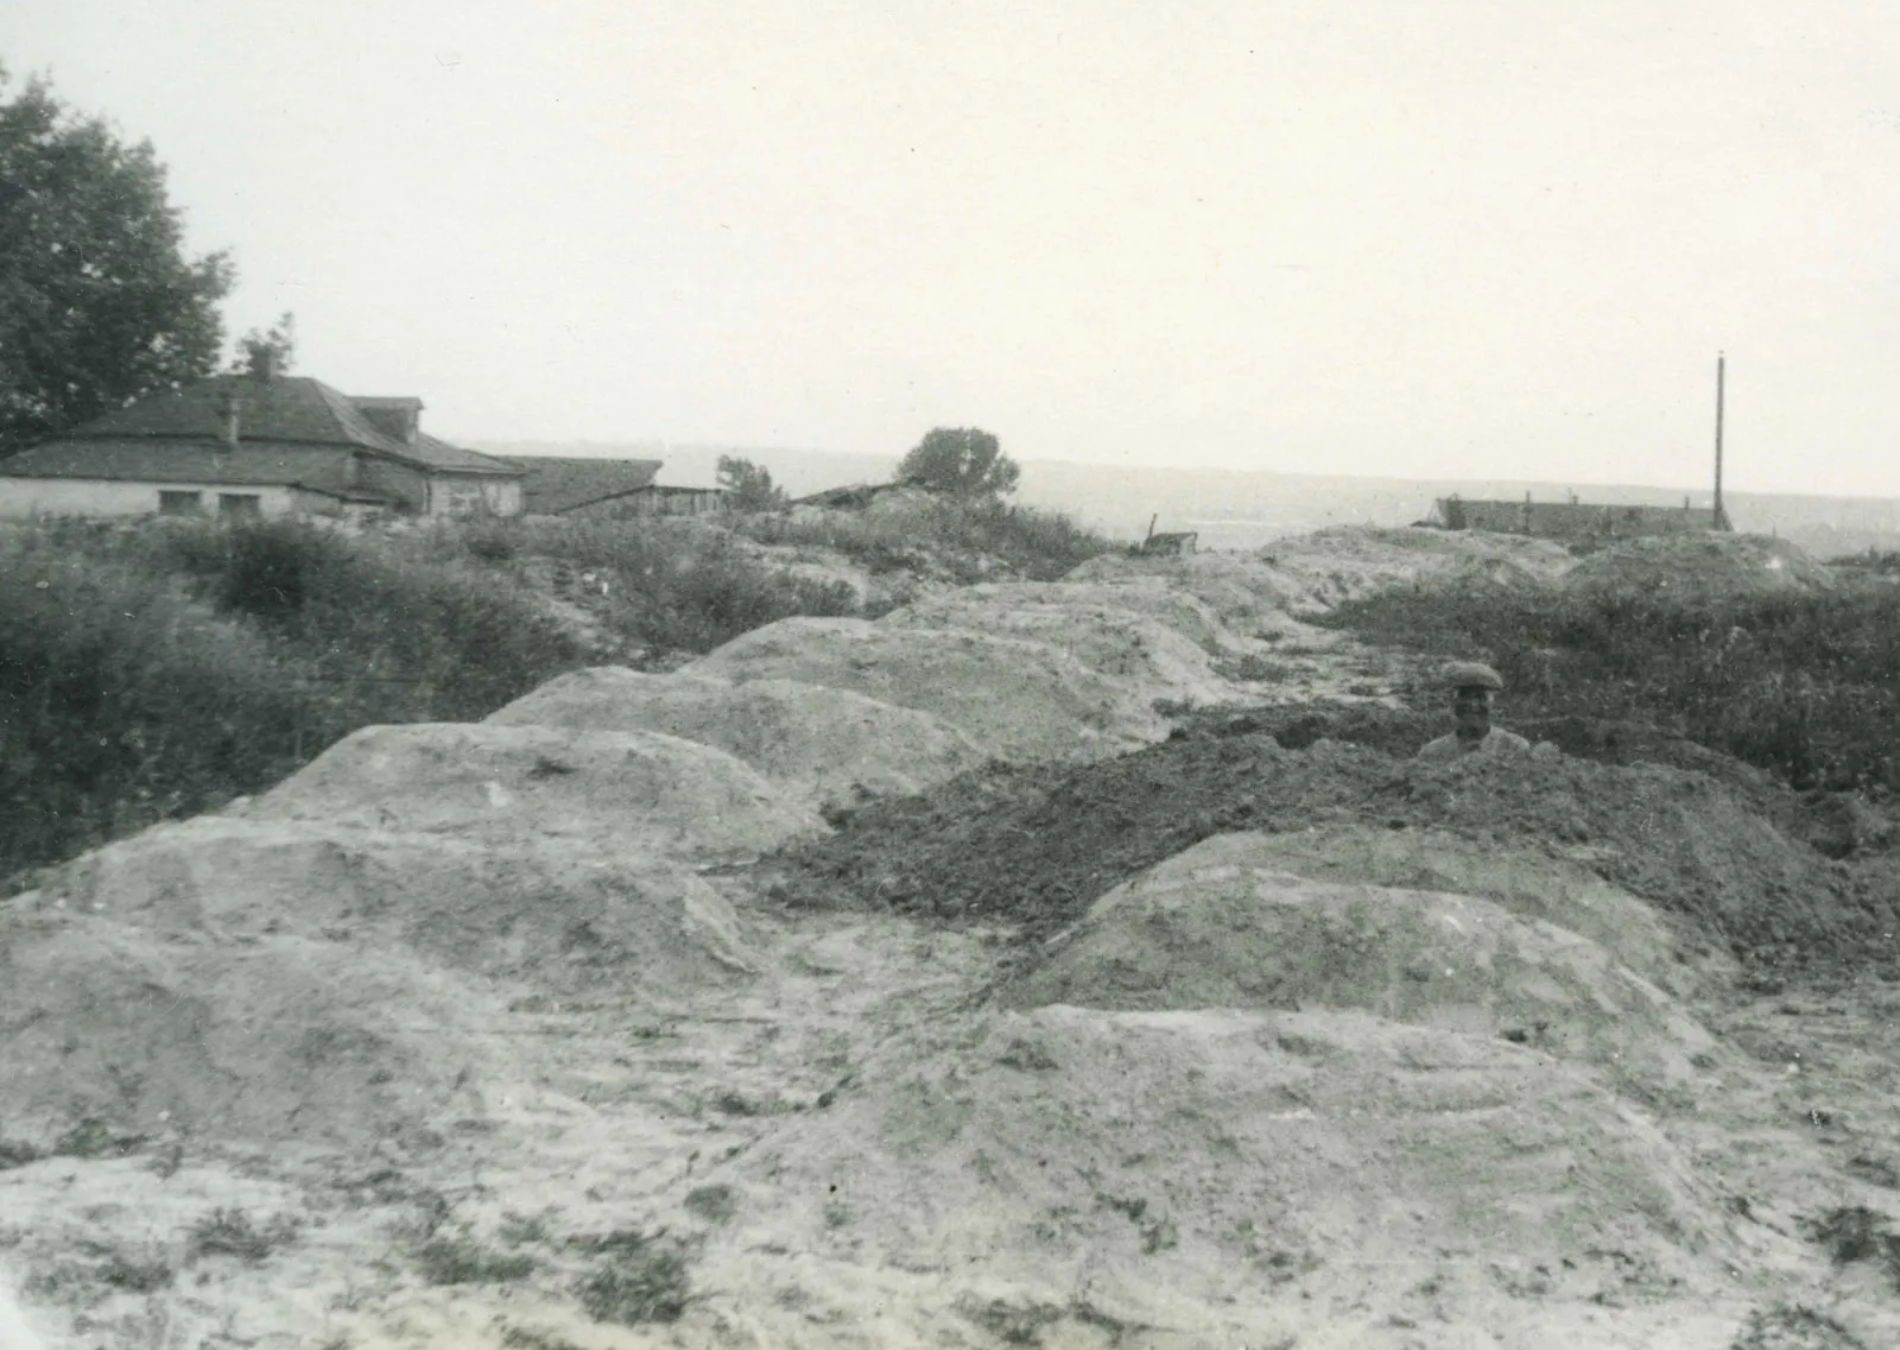 Mass graves filled with victims of the Holodomor, Kharkiv, Ukraine, photo by Alexander Wienerberger, 1933.